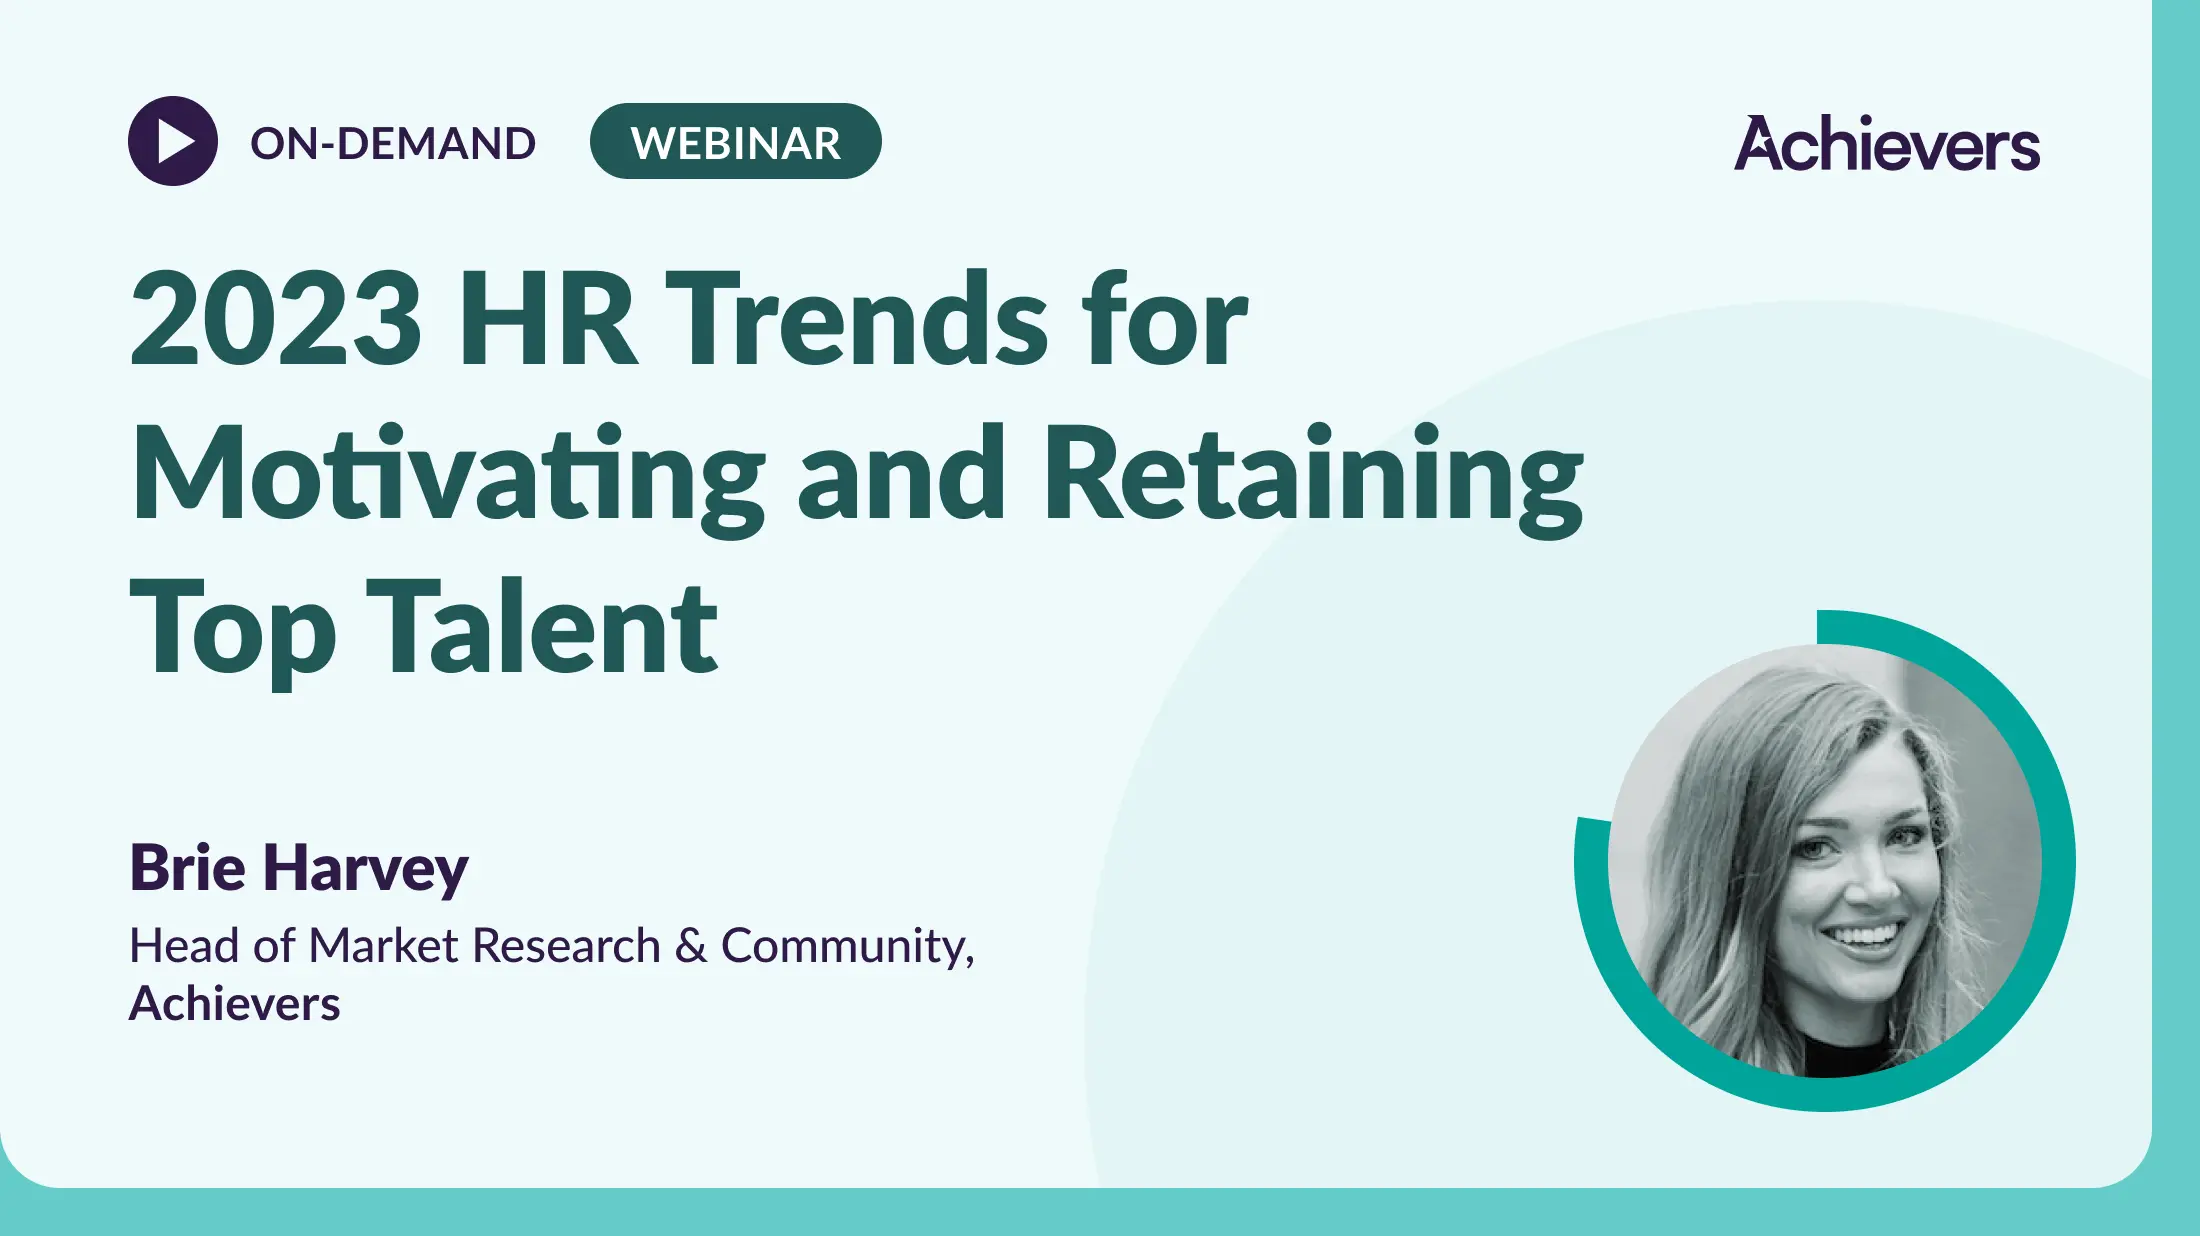 2023 HR Trends for Motivating and Retaining Top Talent Webinar 